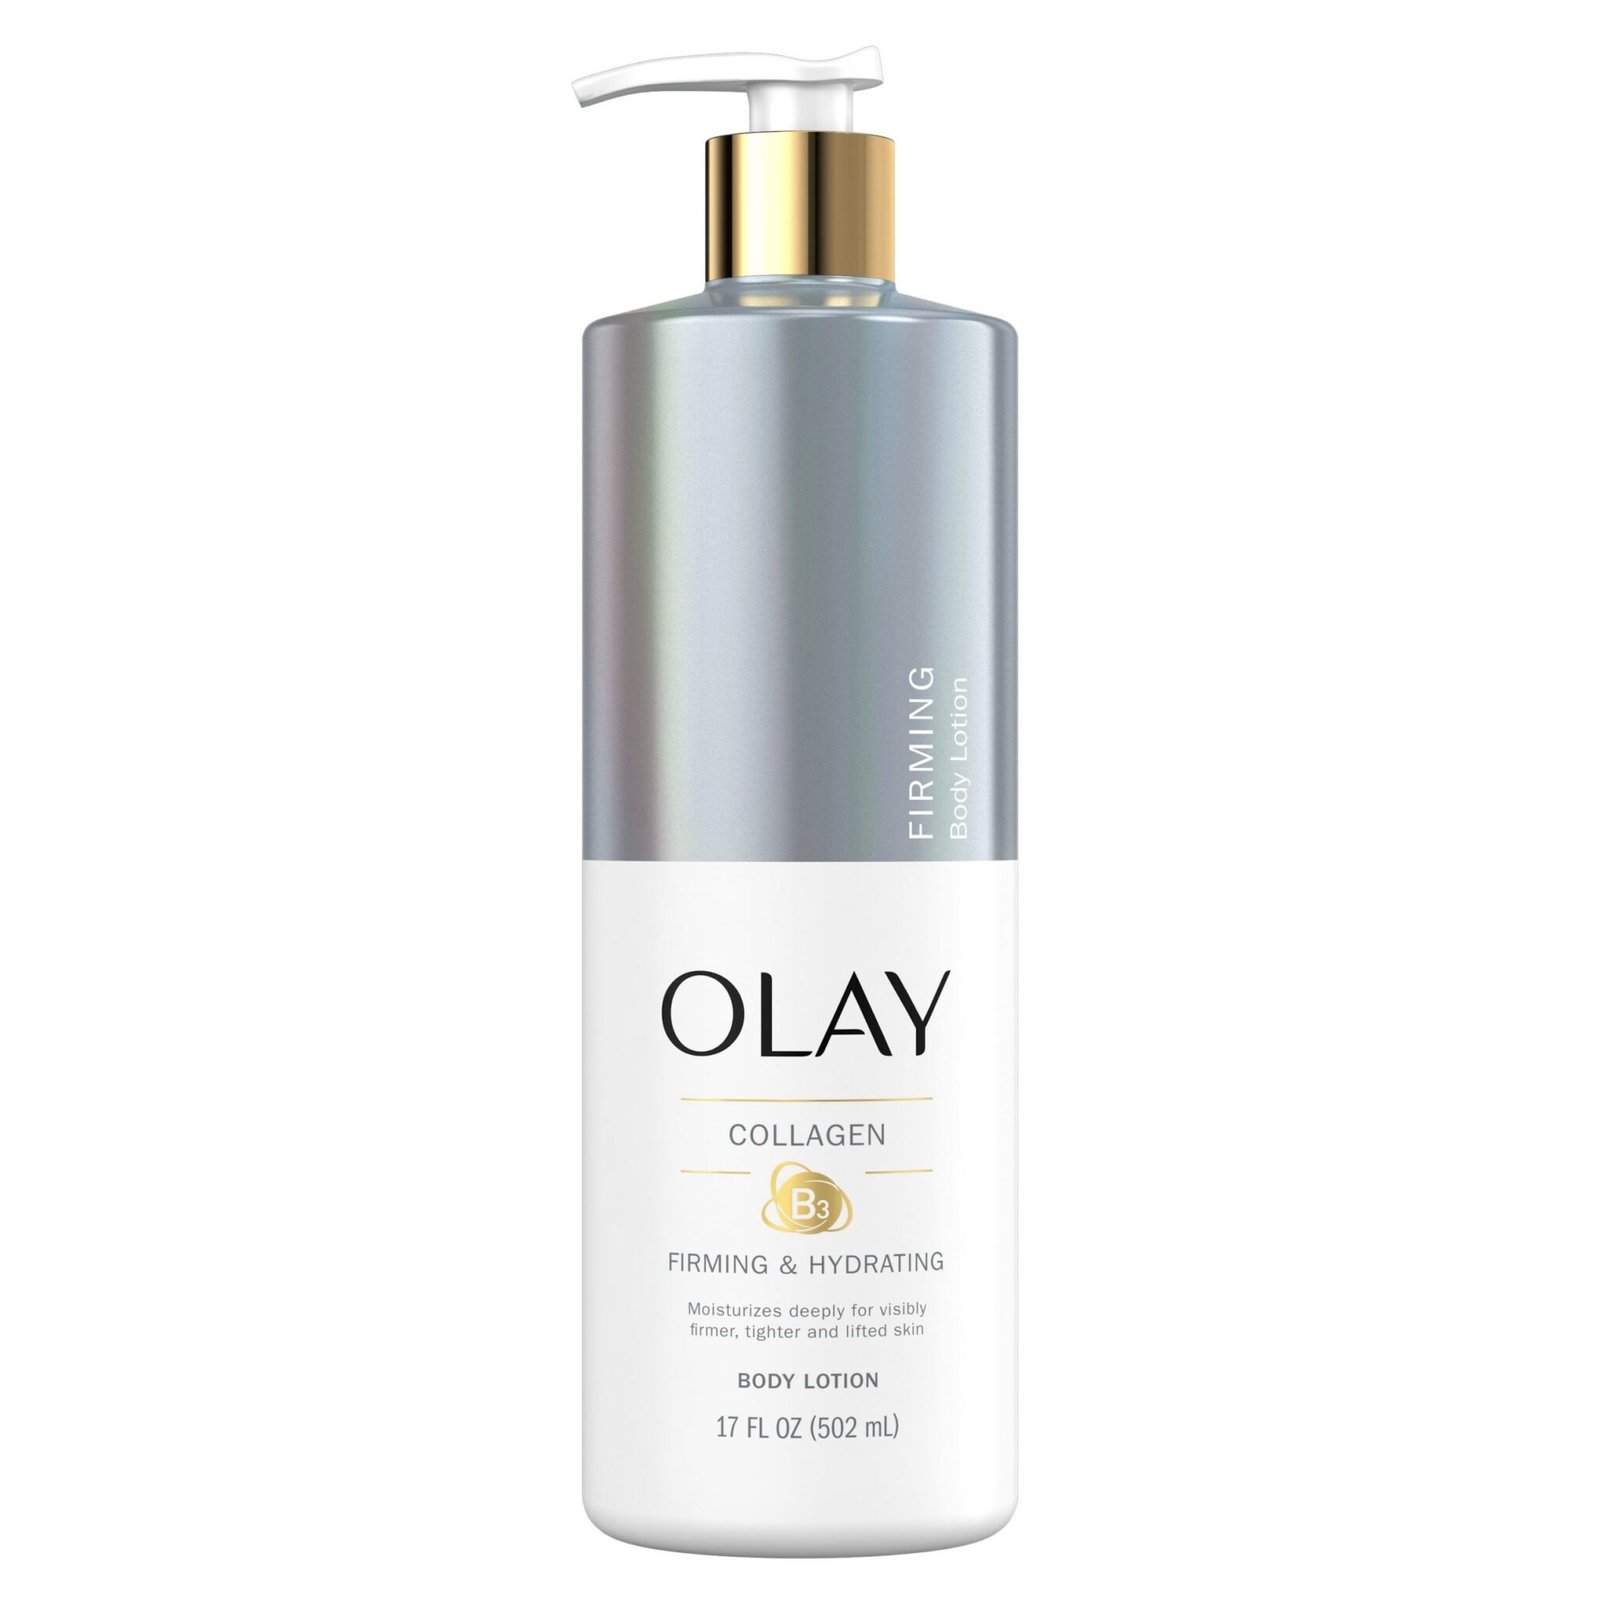 Olay Body Lotion 502ml Collagen Firming